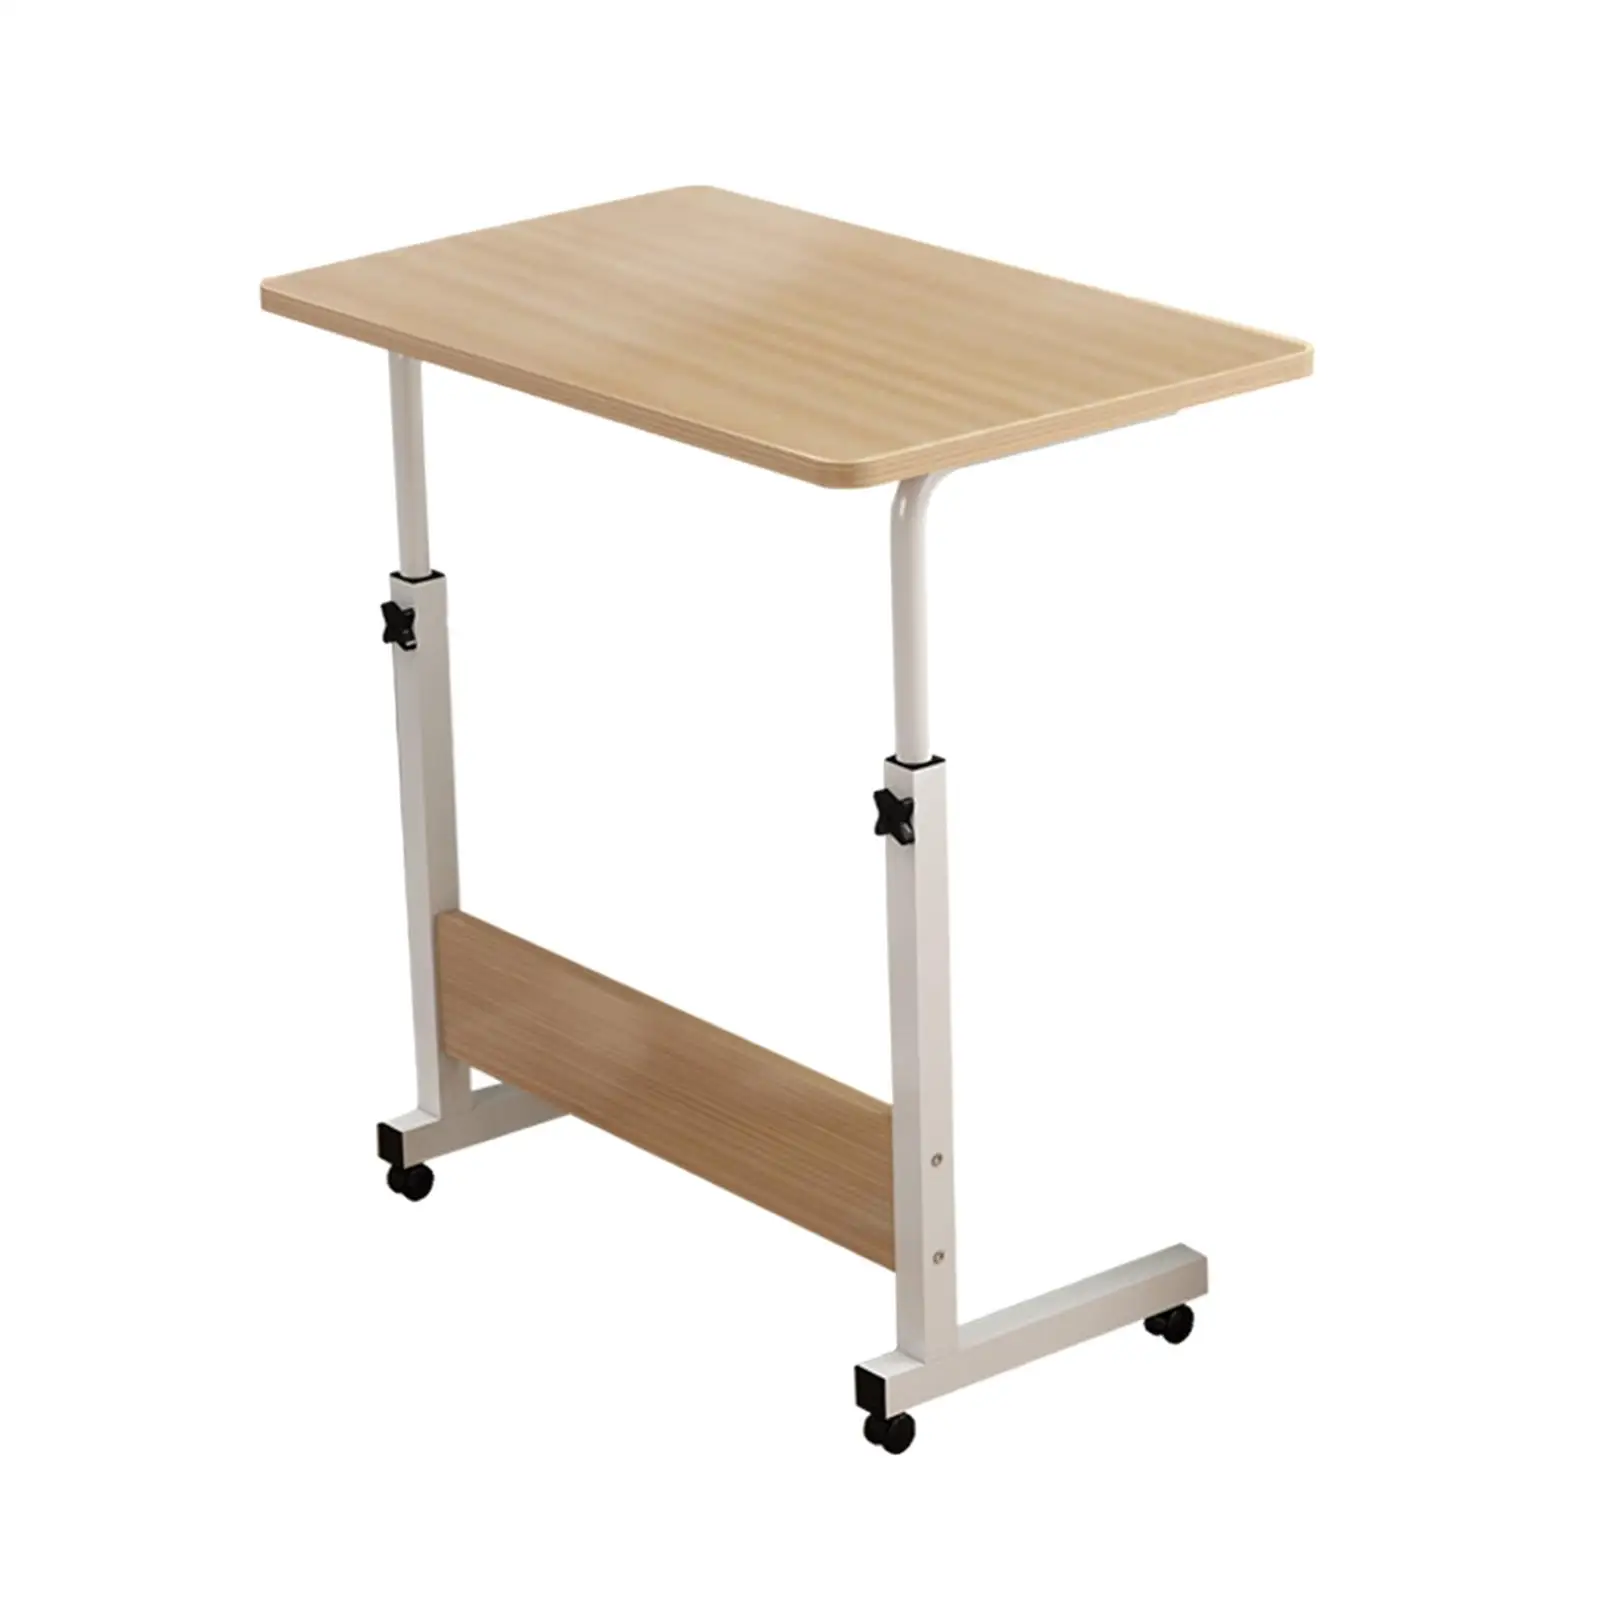 Standing Desk, Height Adjustable, Small Computer Desk for Home